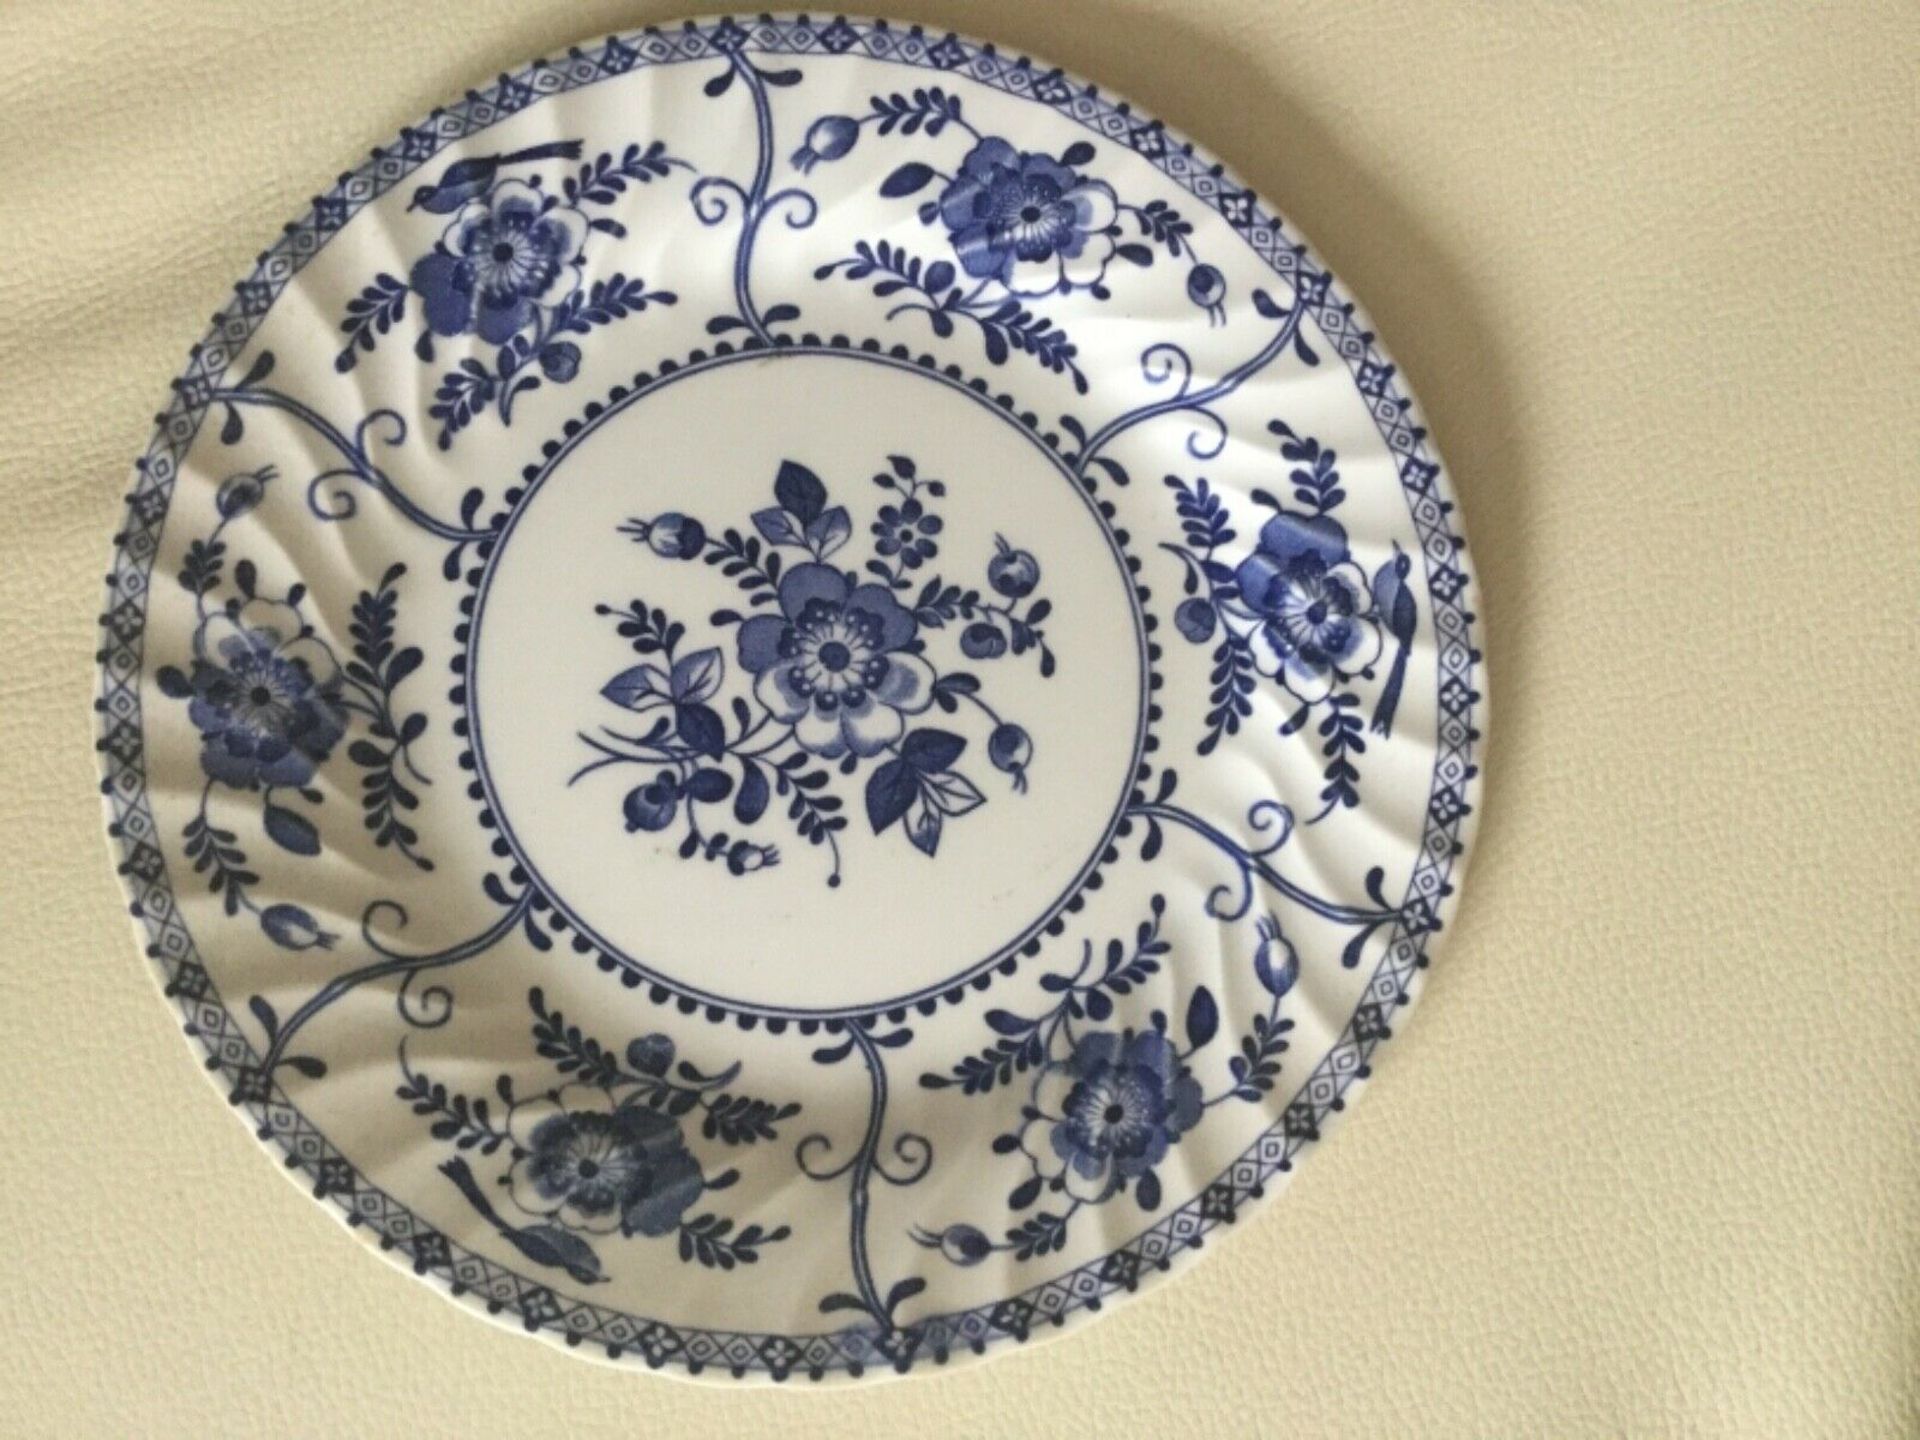 Johnson Brothers “ Indies ” Blue & White Plates 24 pieces - Image 2 of 7